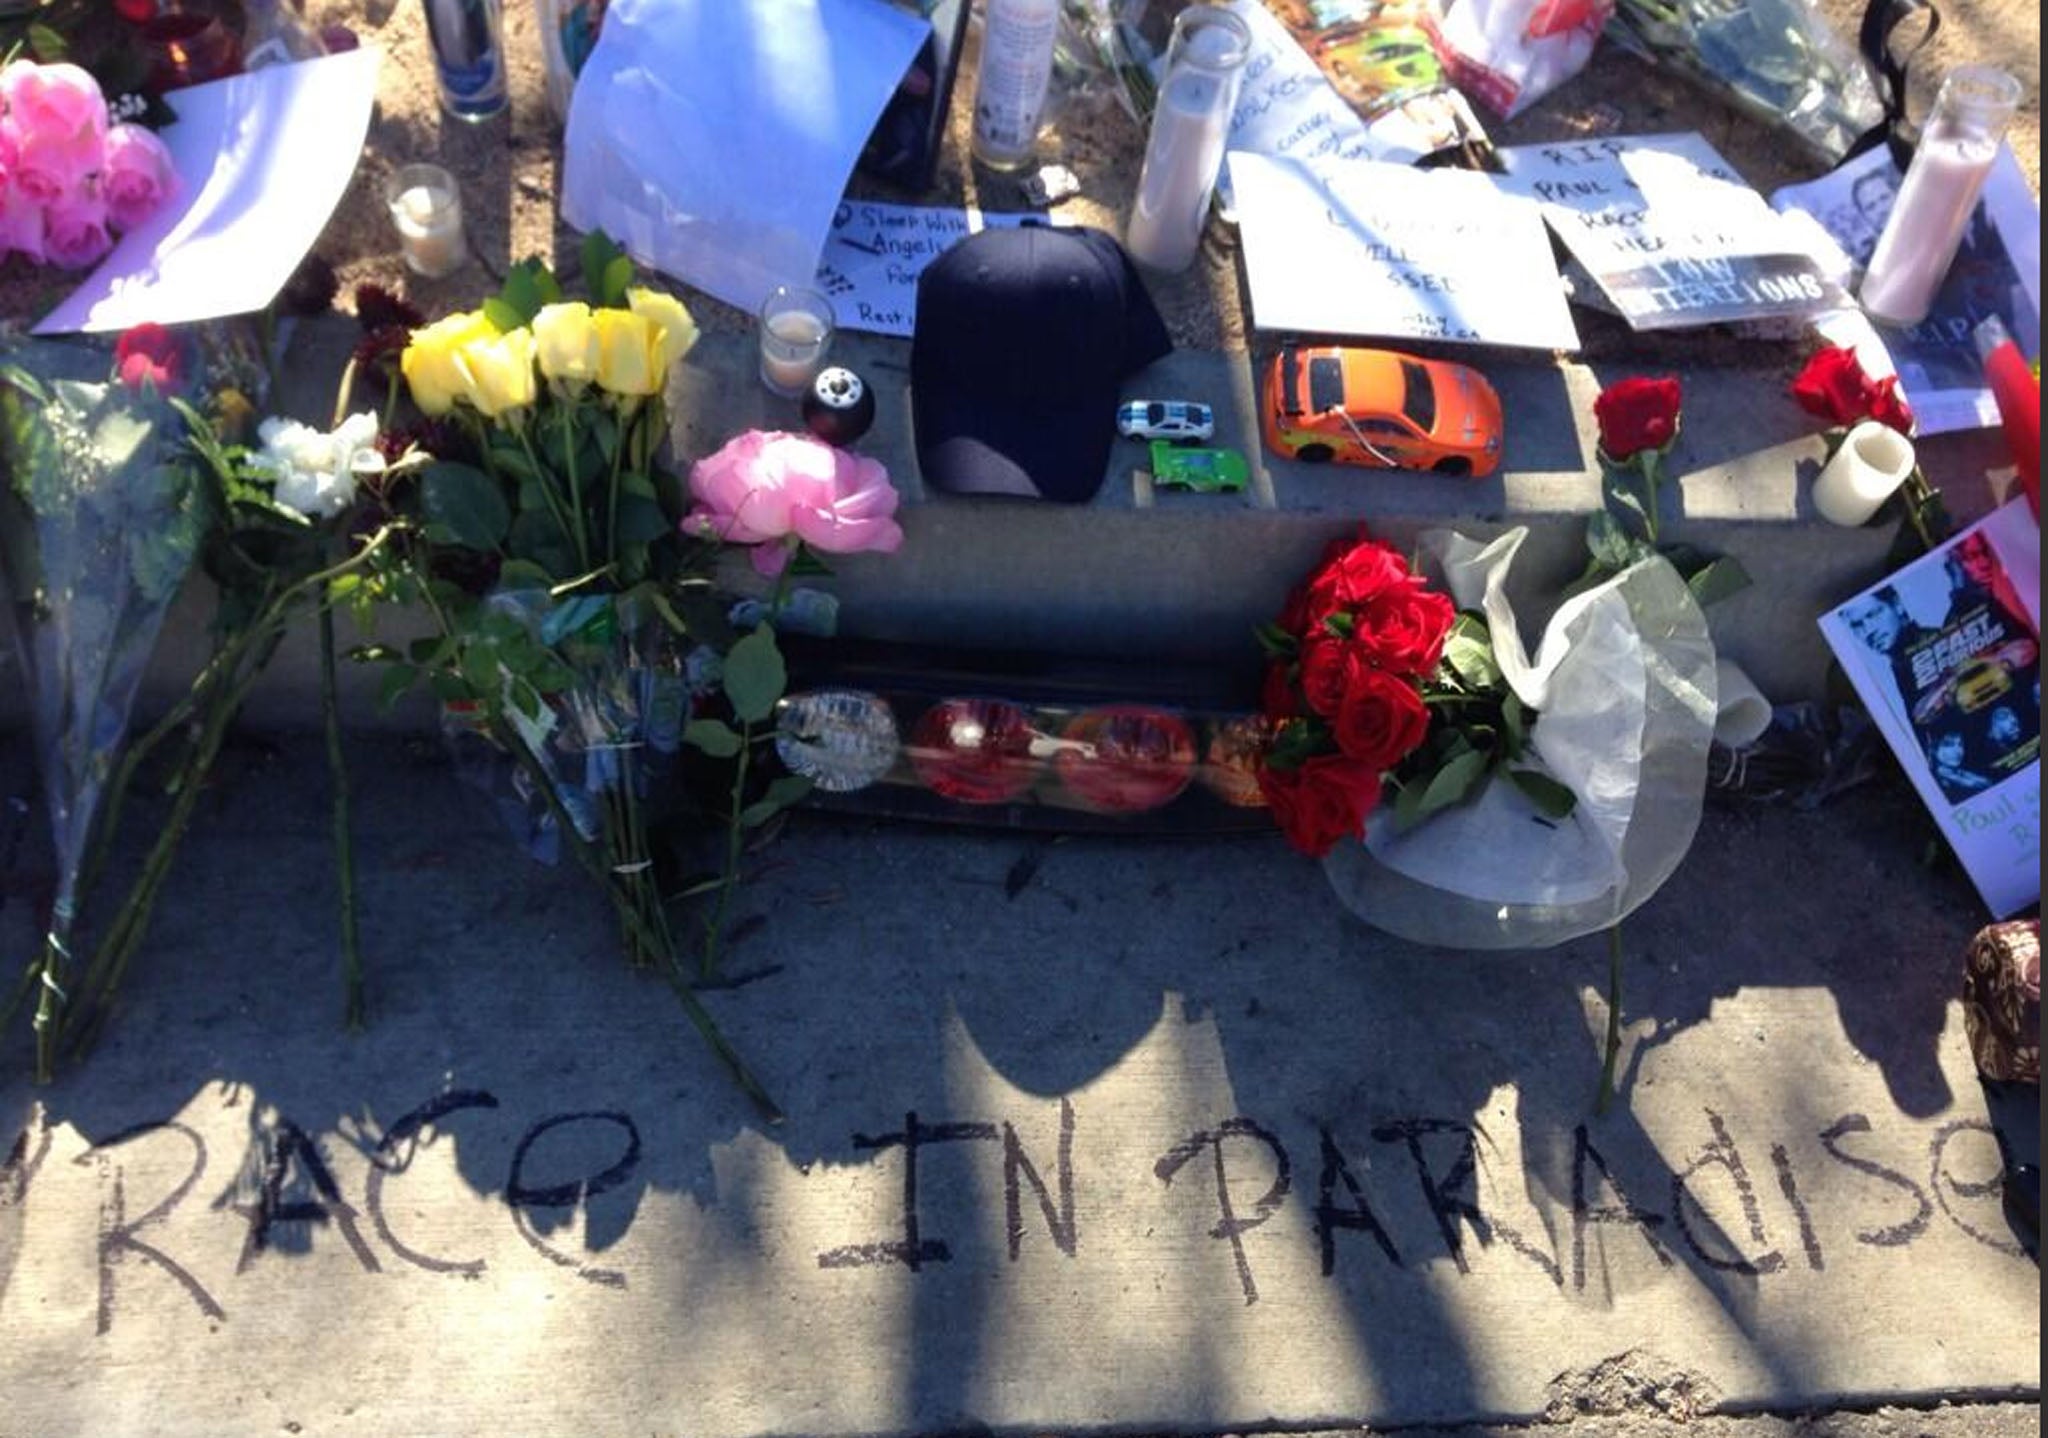 Tributes laid at the scene of the car crash in which actor Paul Walker died